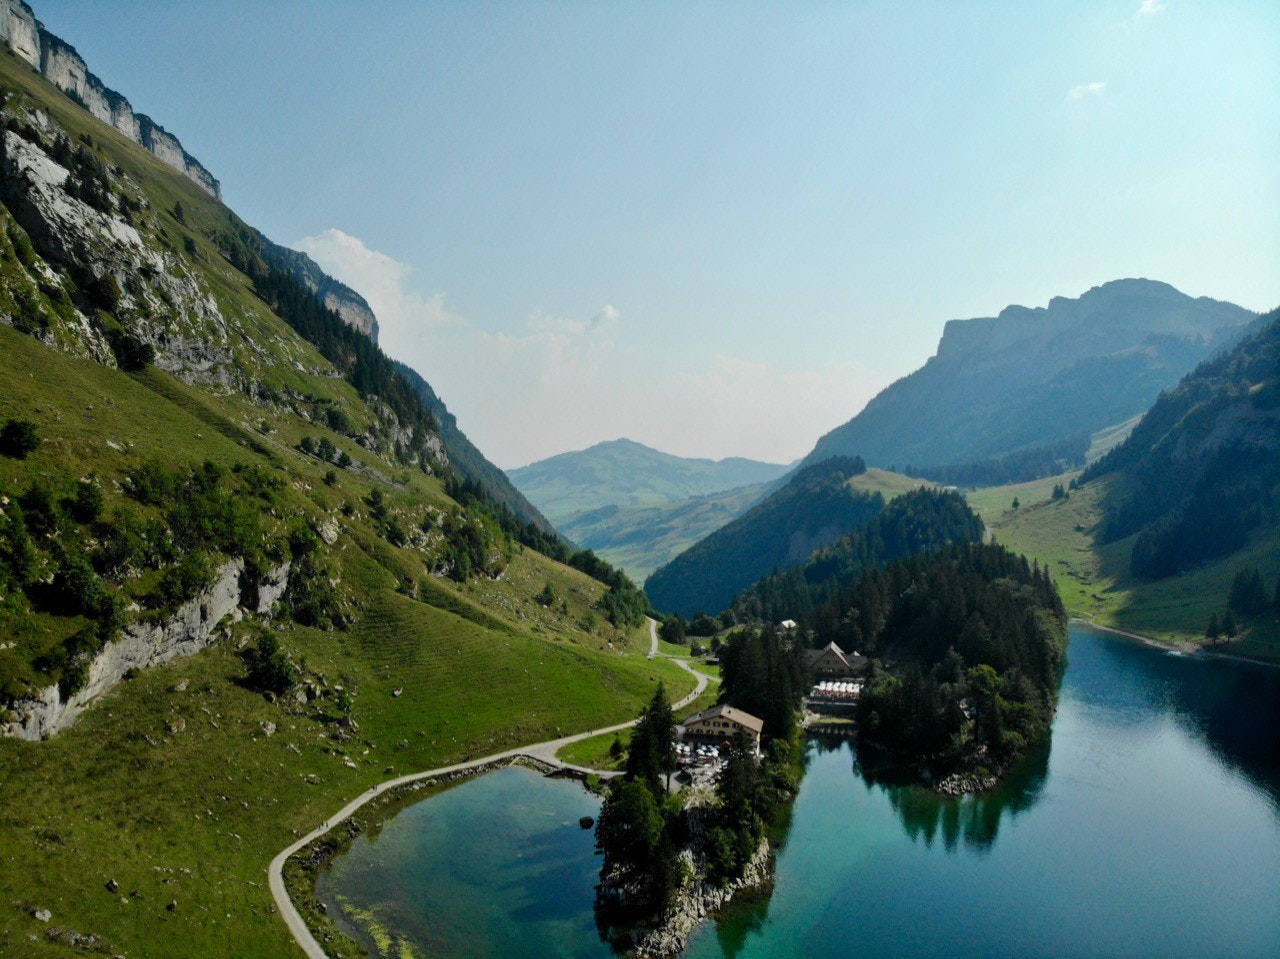 mountain panorama near Appenzell with a lake and reflections of the mountains